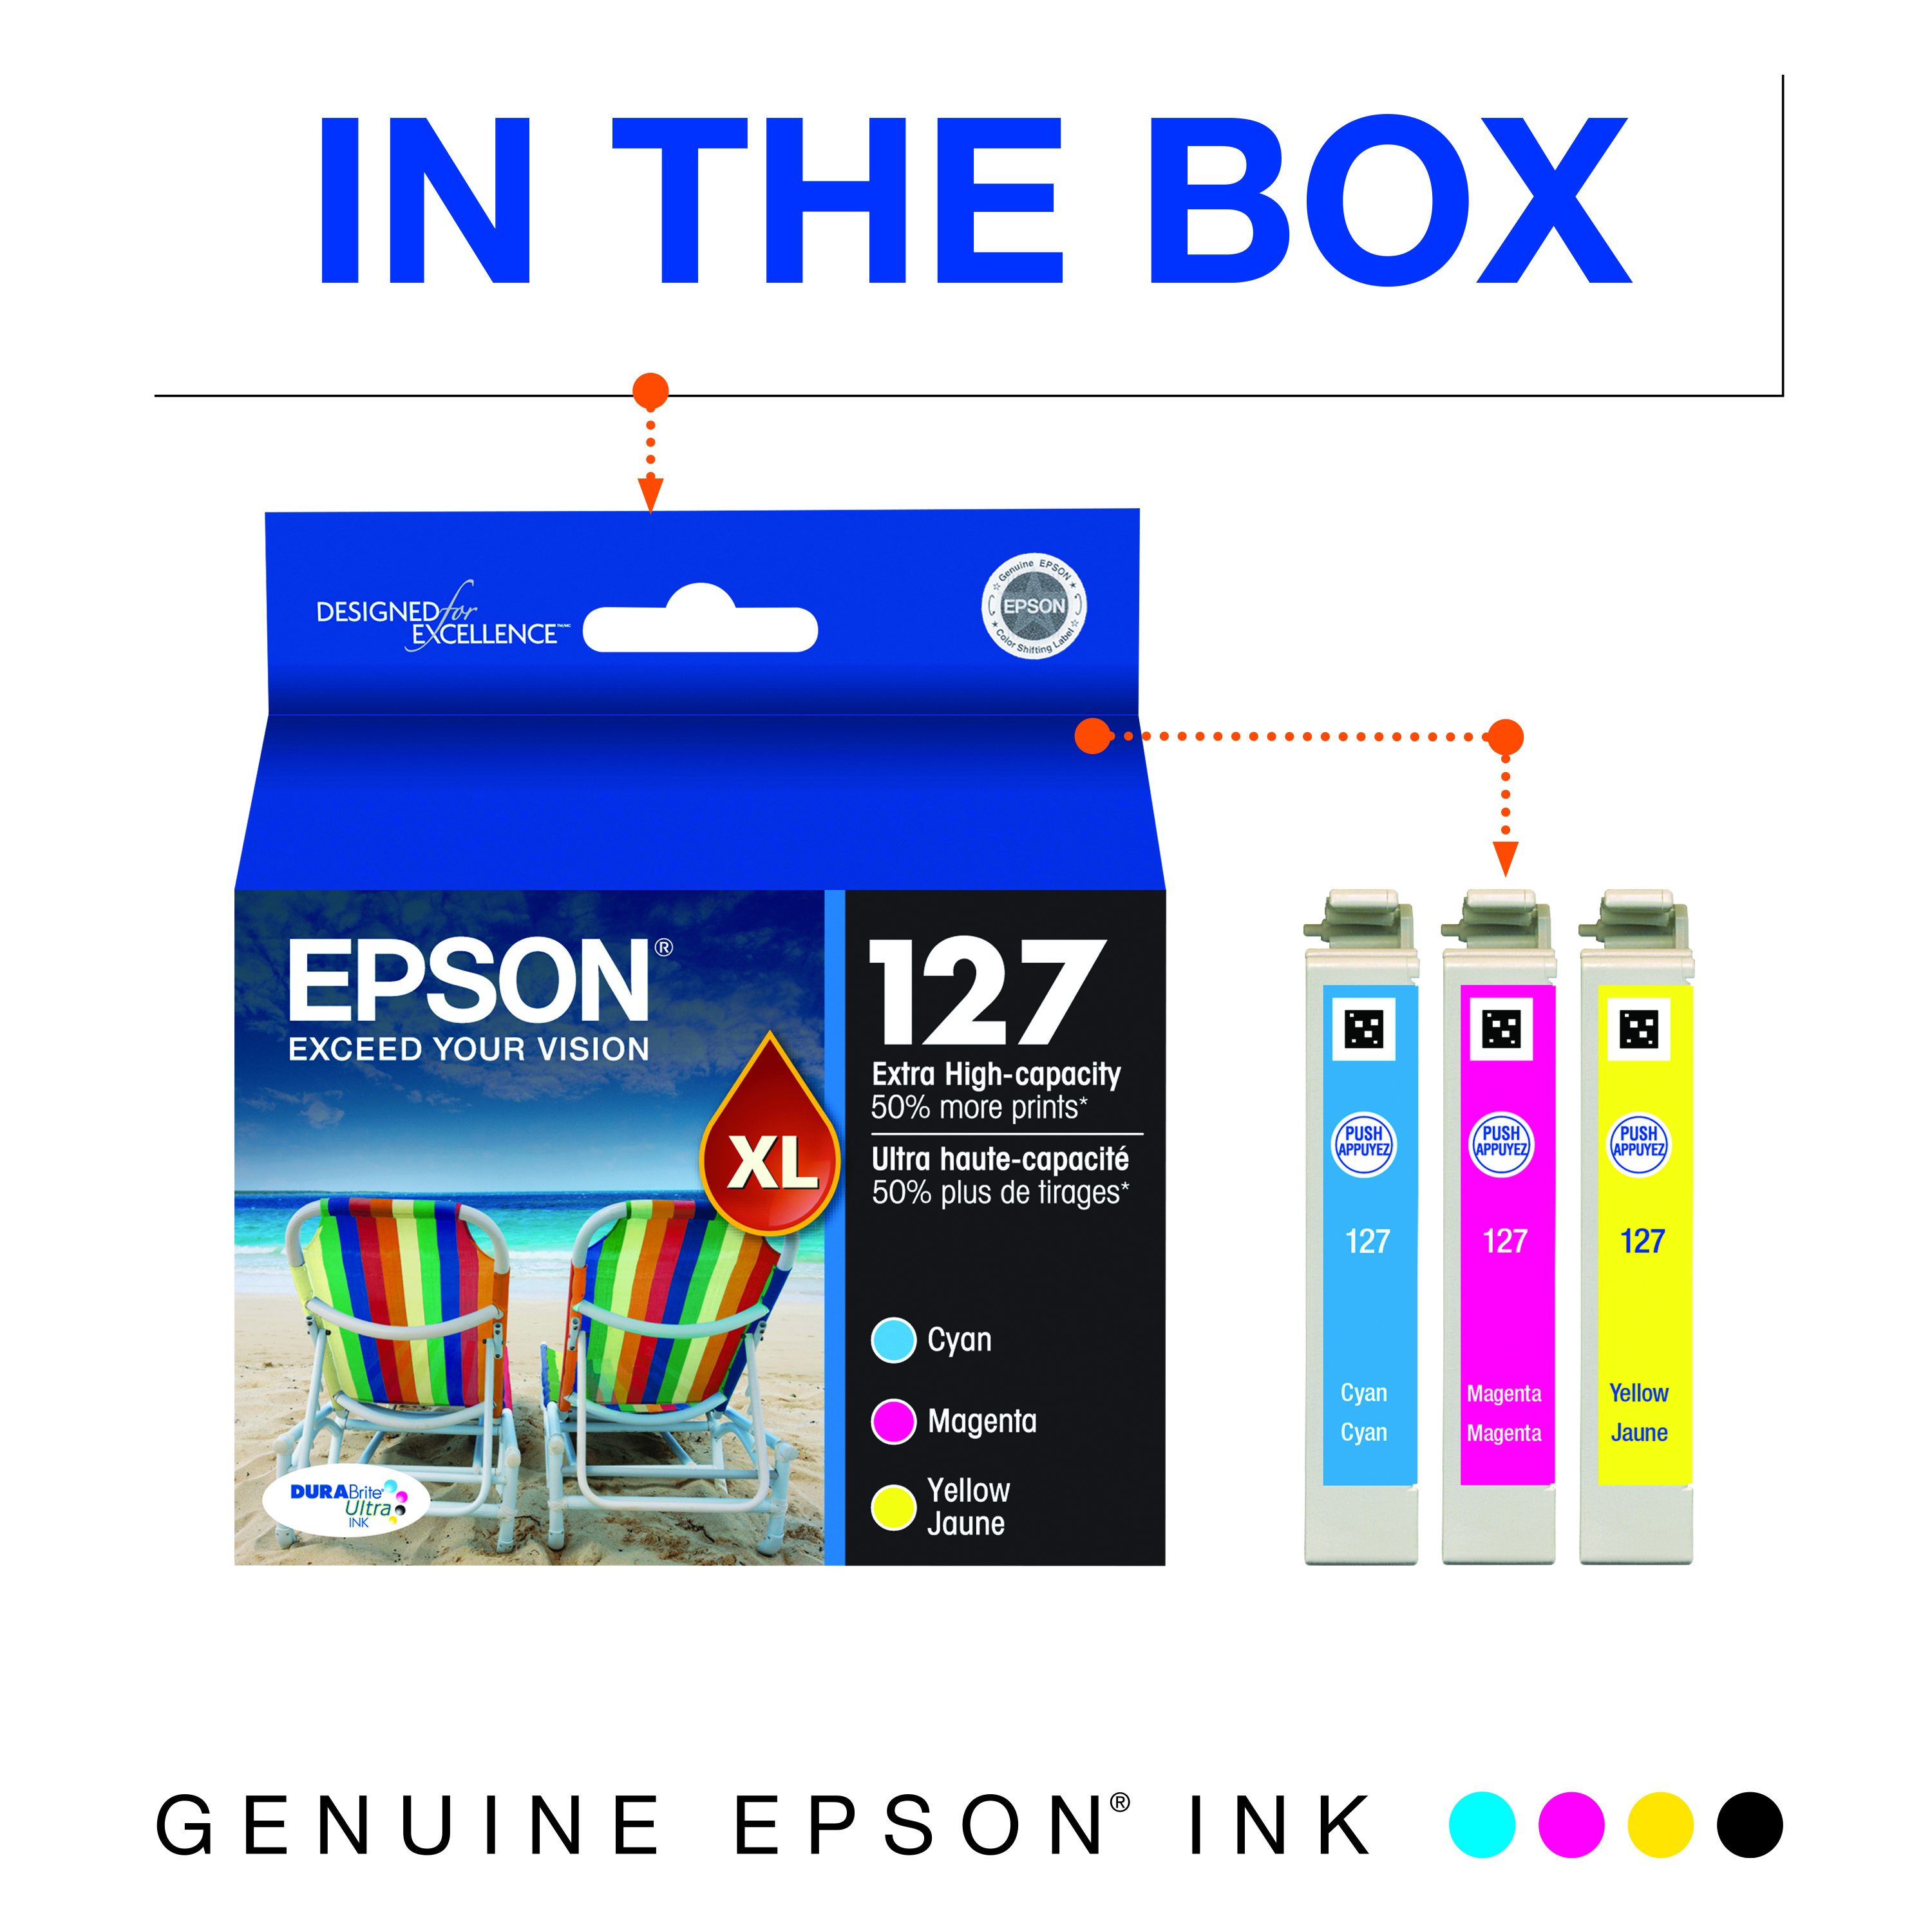 EPSON 127 DURABrite Ultra Ink Color Combo Pack For NX-530, NX-625,  WF-3520, WF-3530, WF-3540, WF-545, WF-60, WF-630, WF-633, WF-635, WF-645, WF-7010, WF-7510, WF-7520, WF-840, WF-845 - image 5 of 6